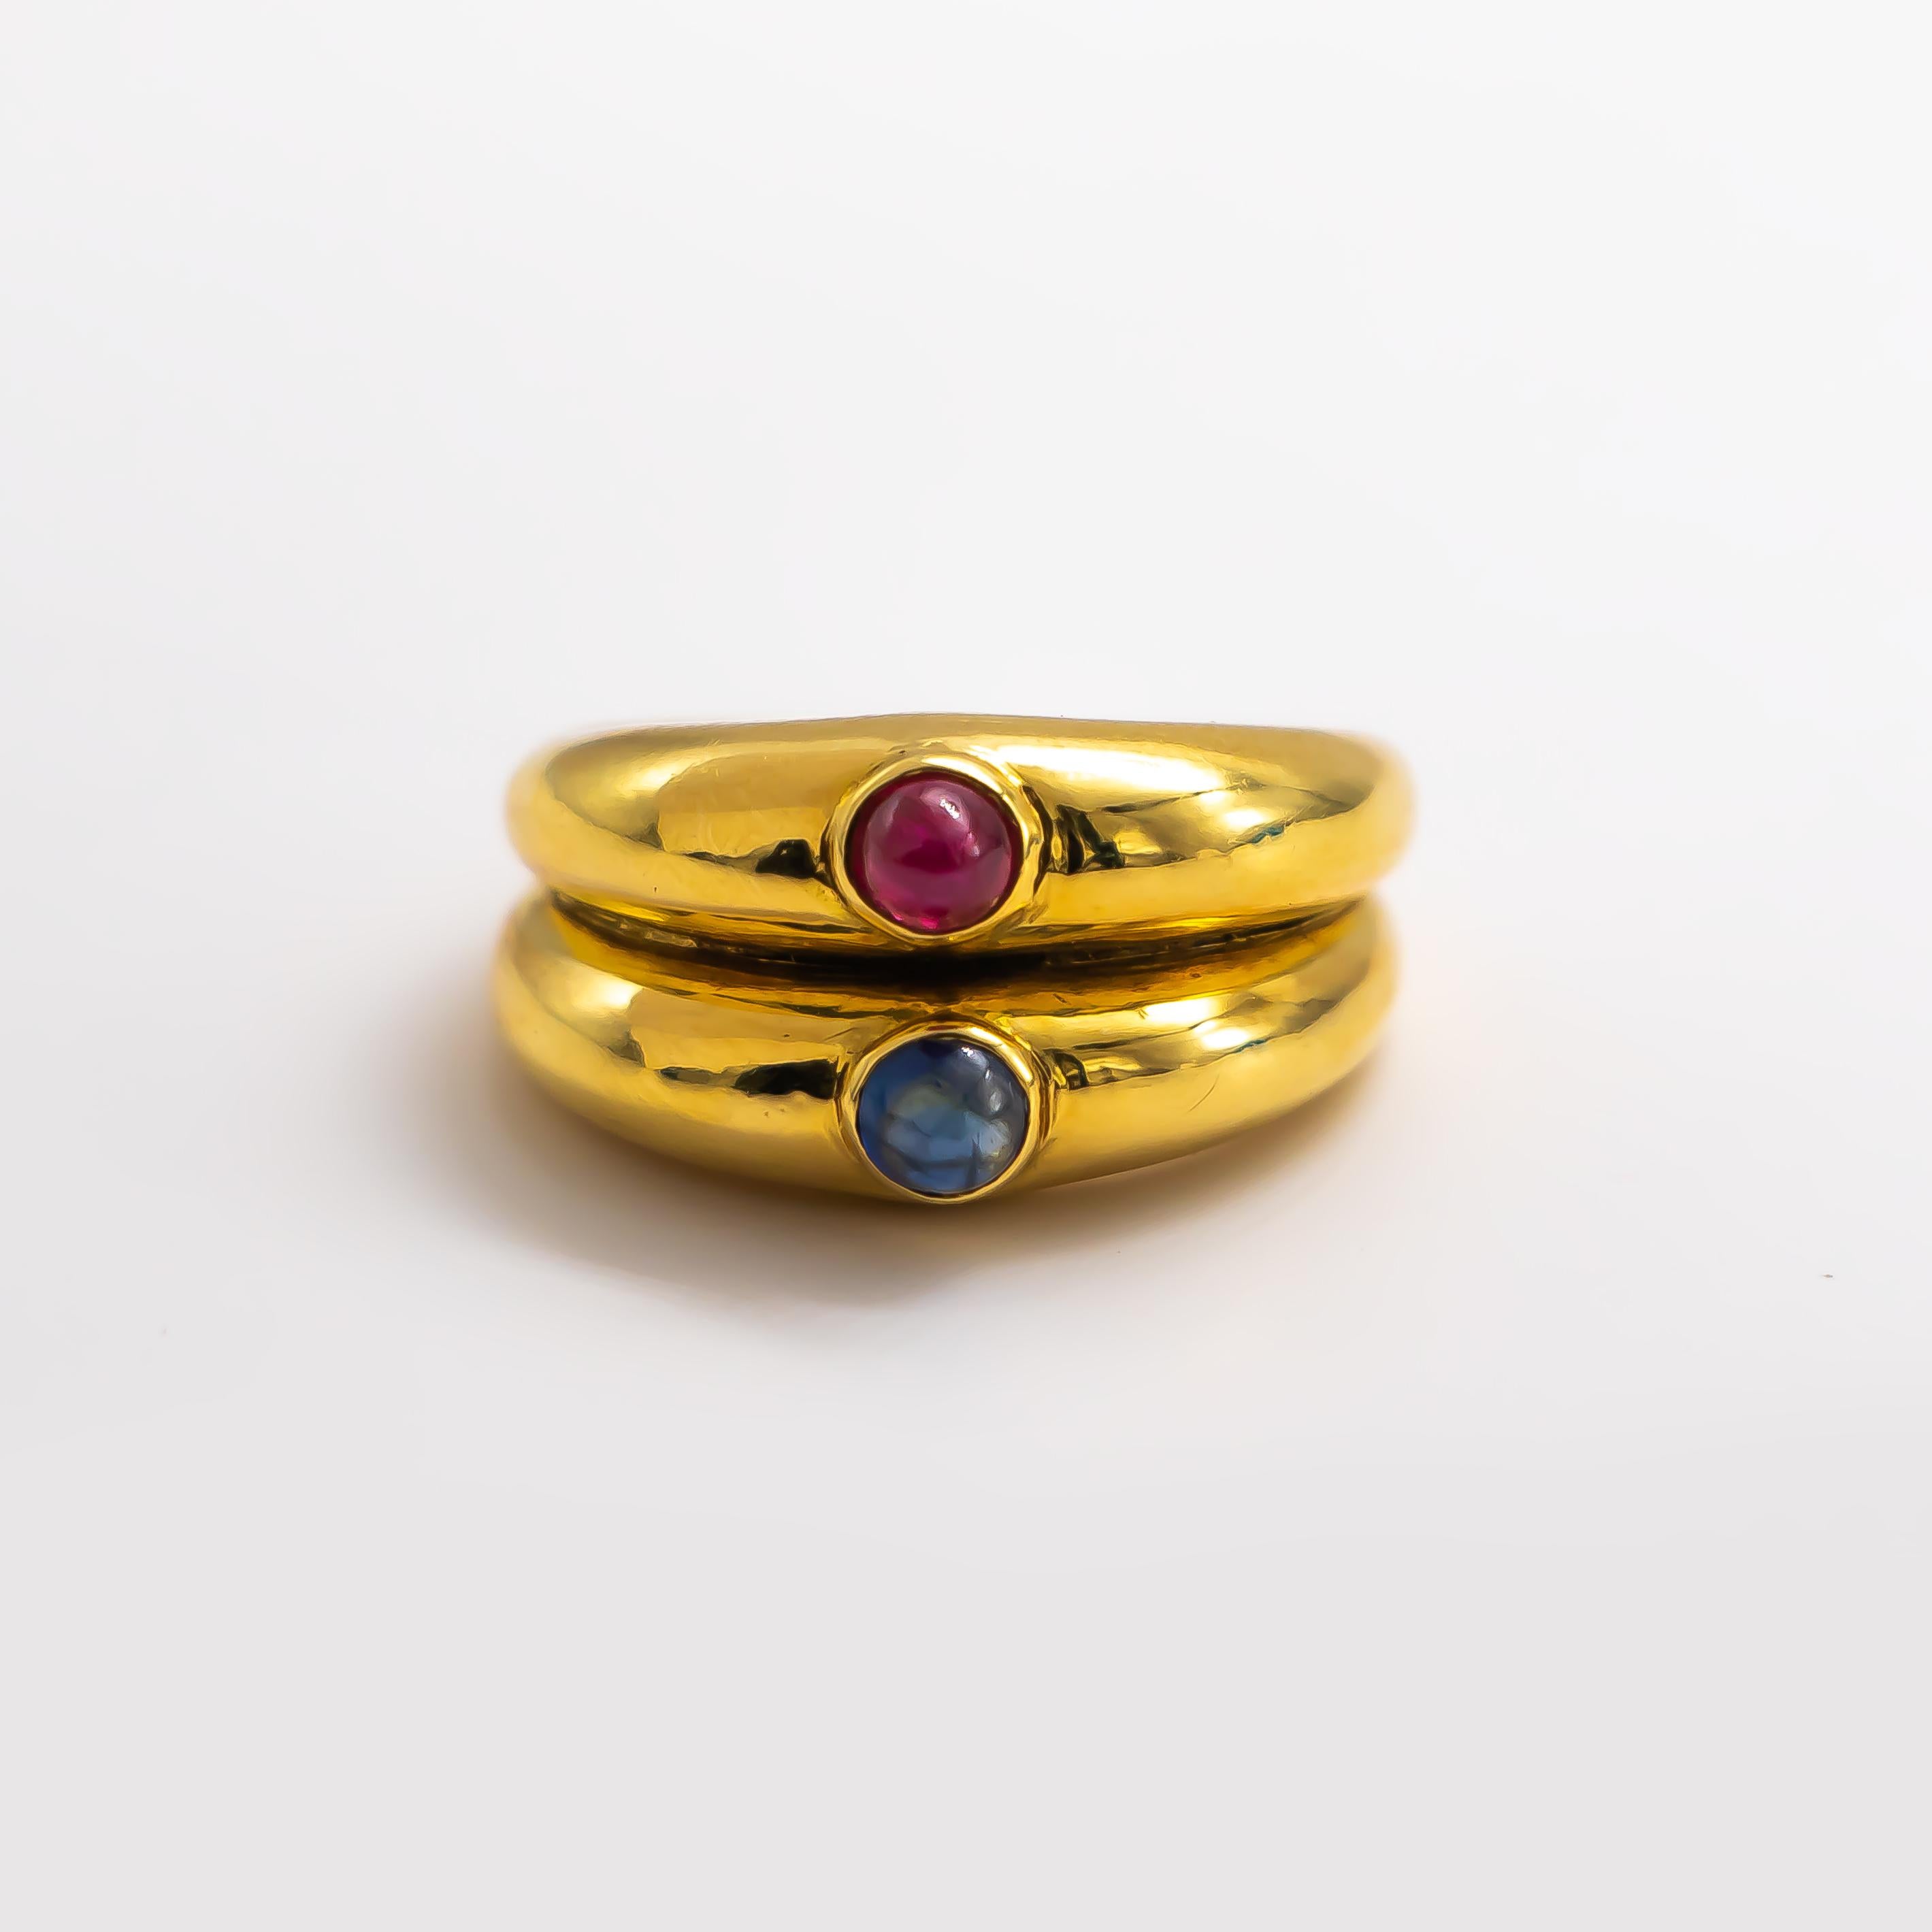 Cabochon 0.2 Carat Ruby and Cabochon 0.2 Carat Sapphire Ring 18K Yellow Gold 2